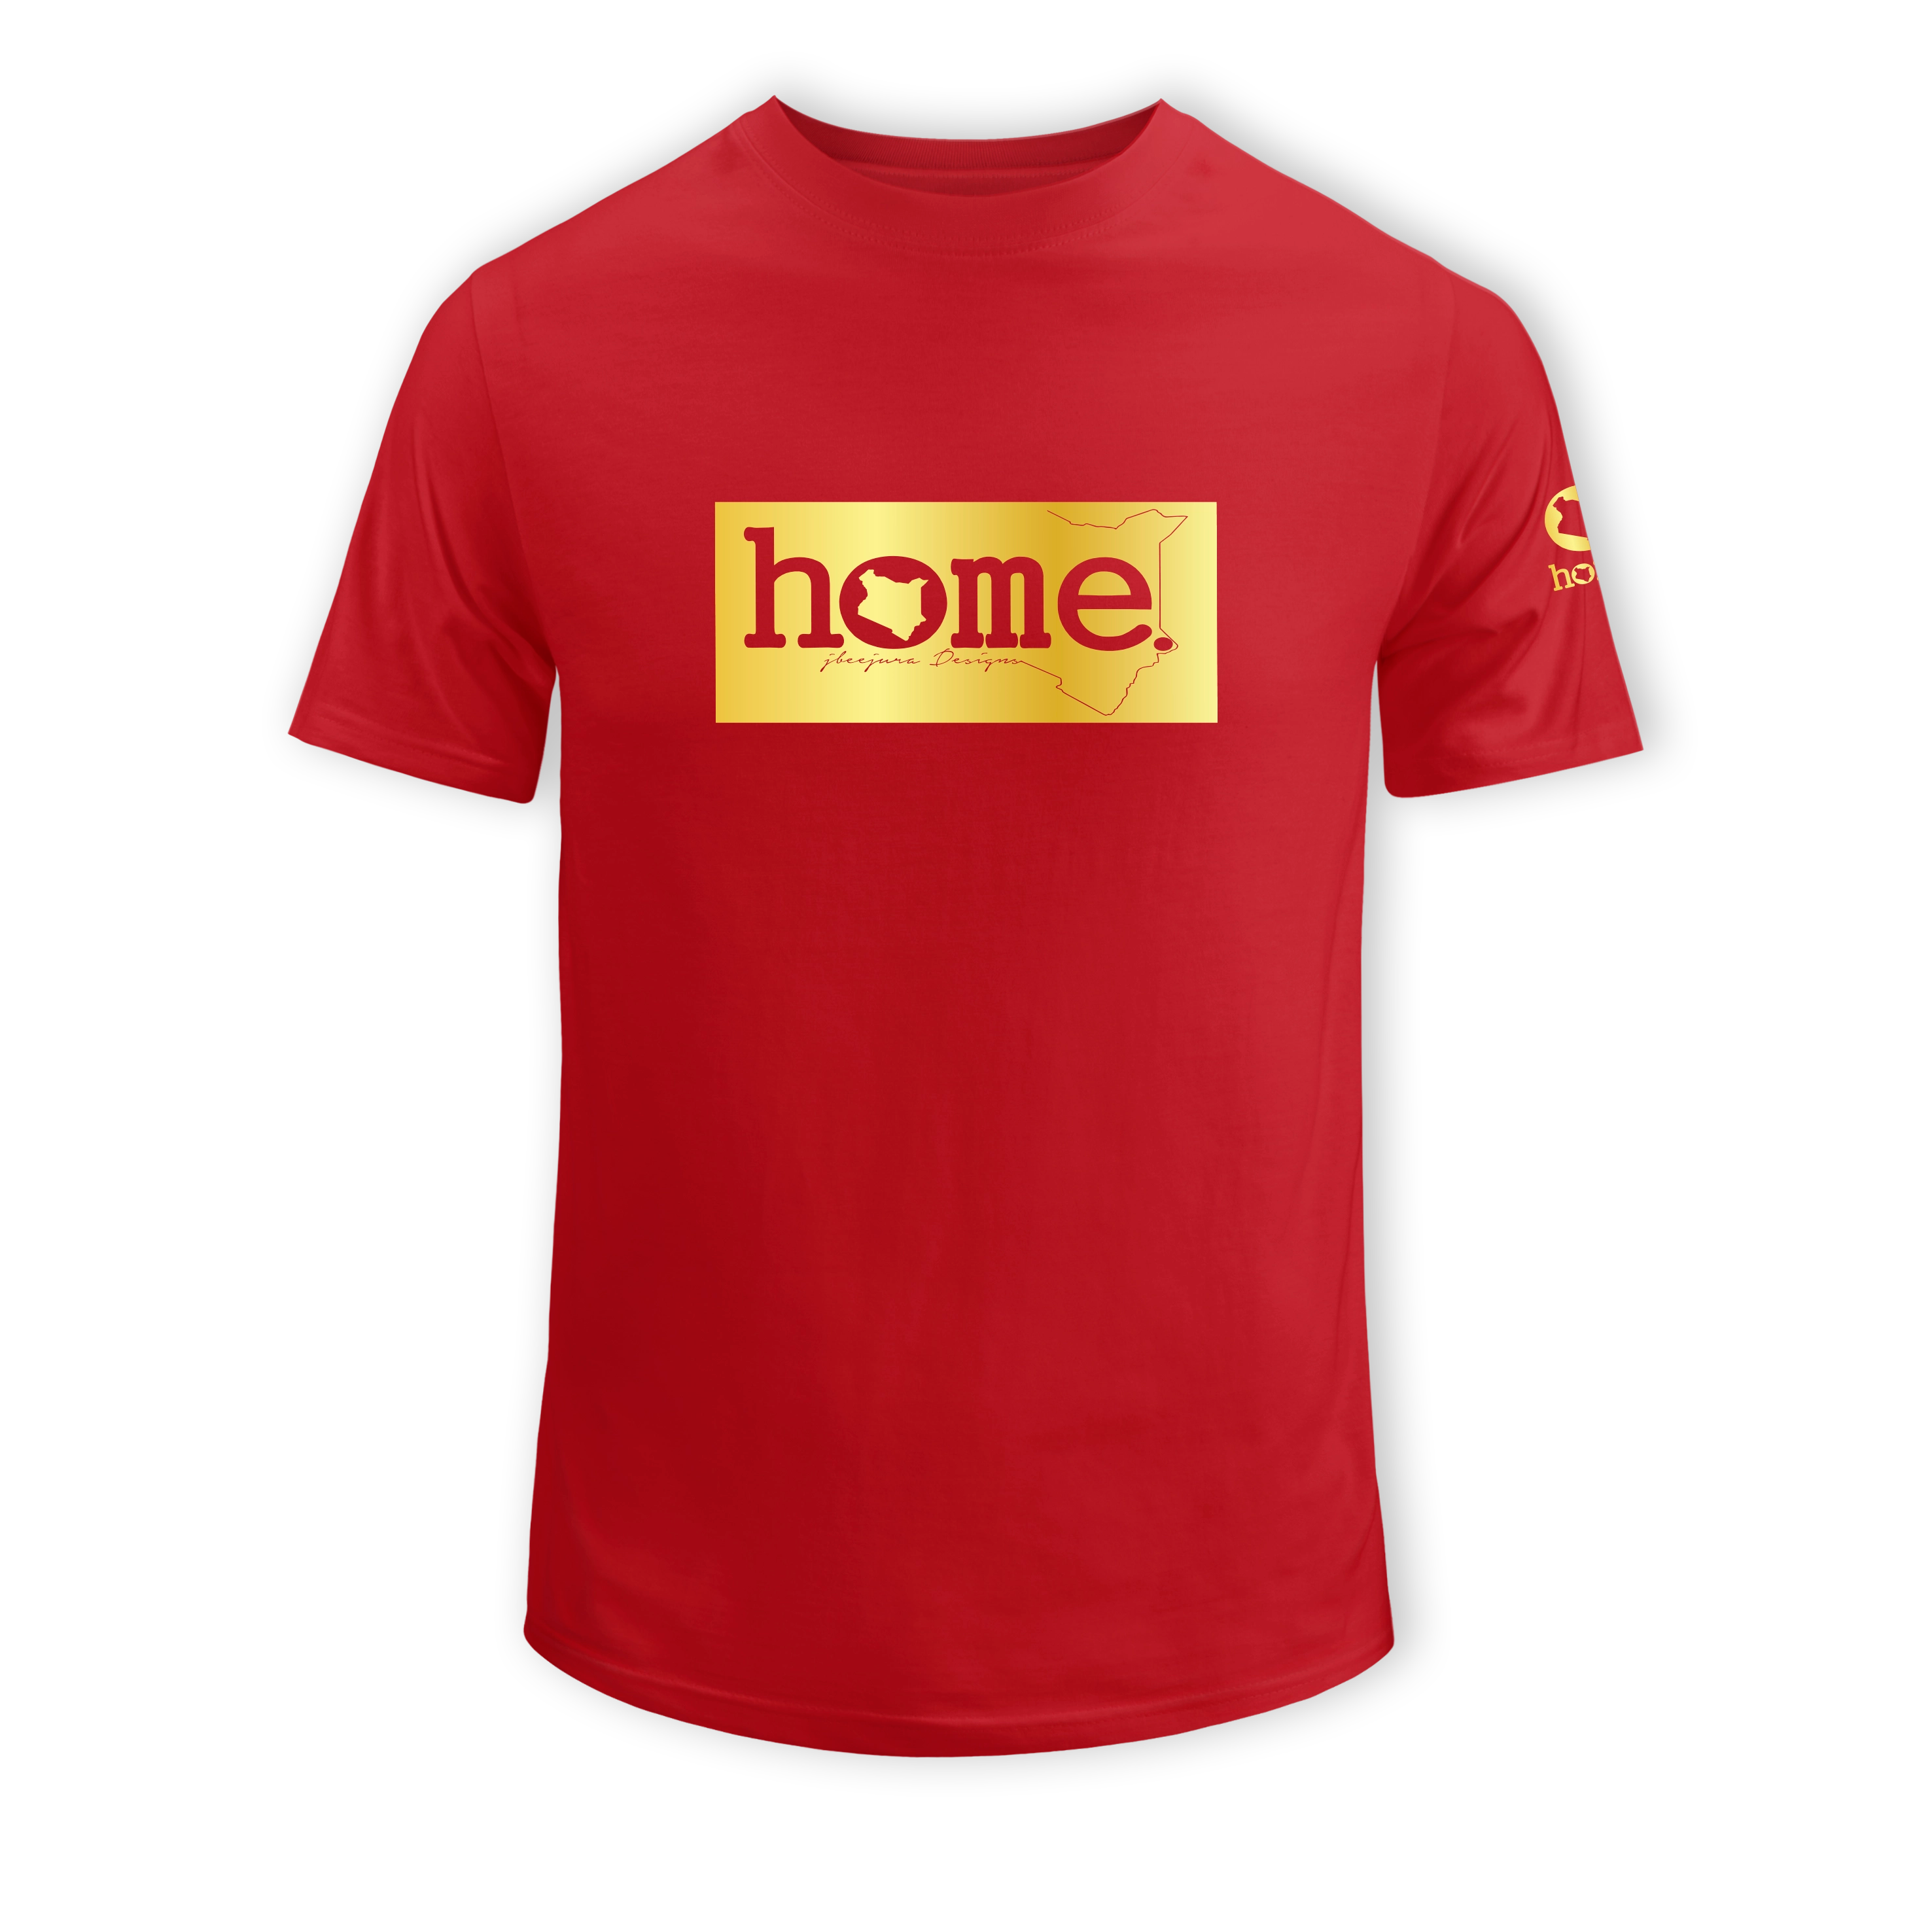 home_254 KIDS SHORT-SLEEVED RED T-SHIRT WITH A GOLD CLASSIC PRINT – COTTON PLUS FABRIC